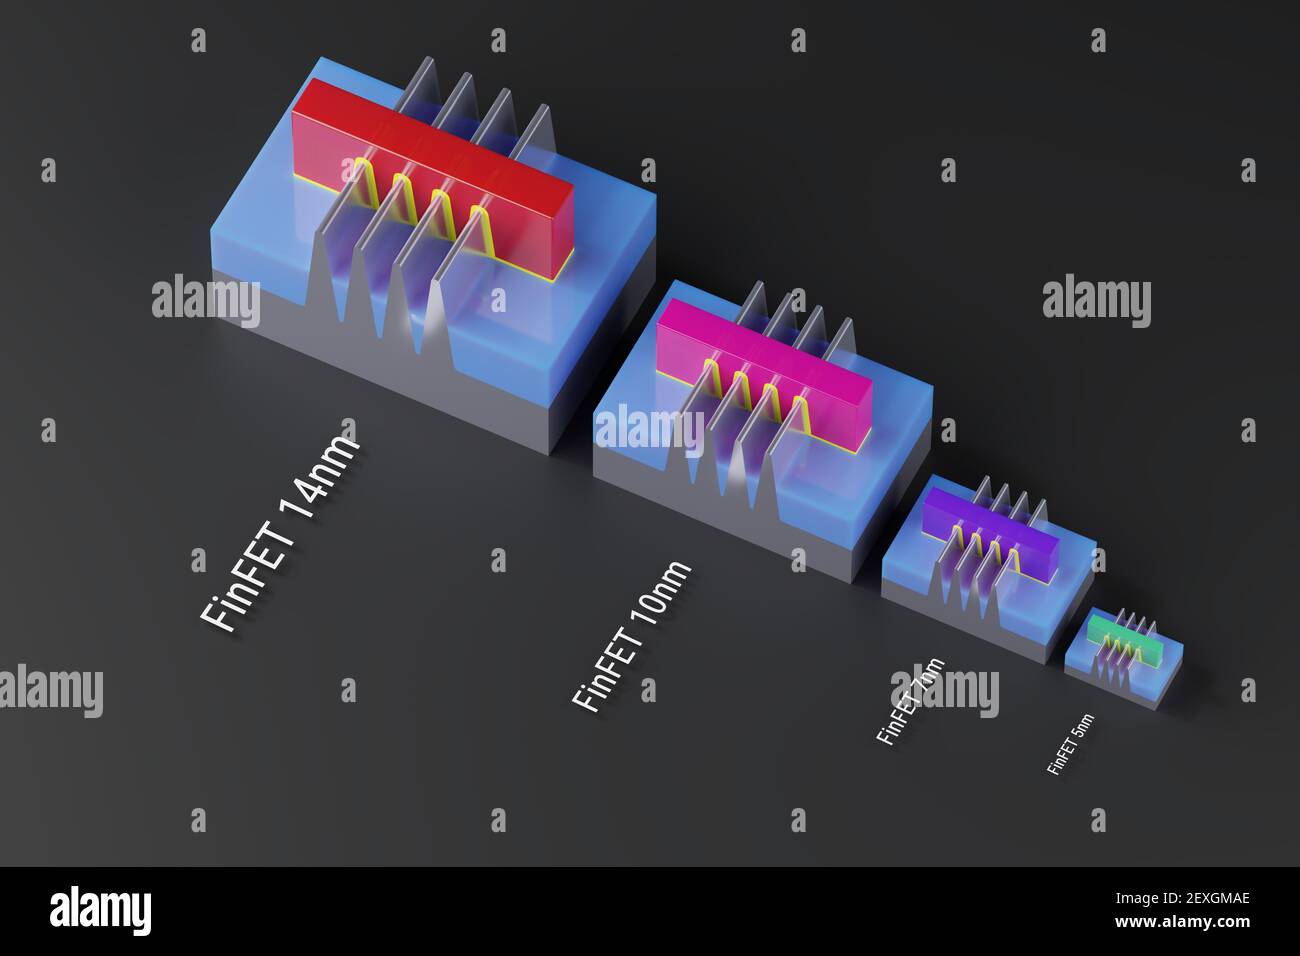 FinFET transistors for 14nm, 10nm, 7 nm, 5nm technology node of chip manufacturing process. 3D models compare the size and area. Illustration for Moor Stock Photo